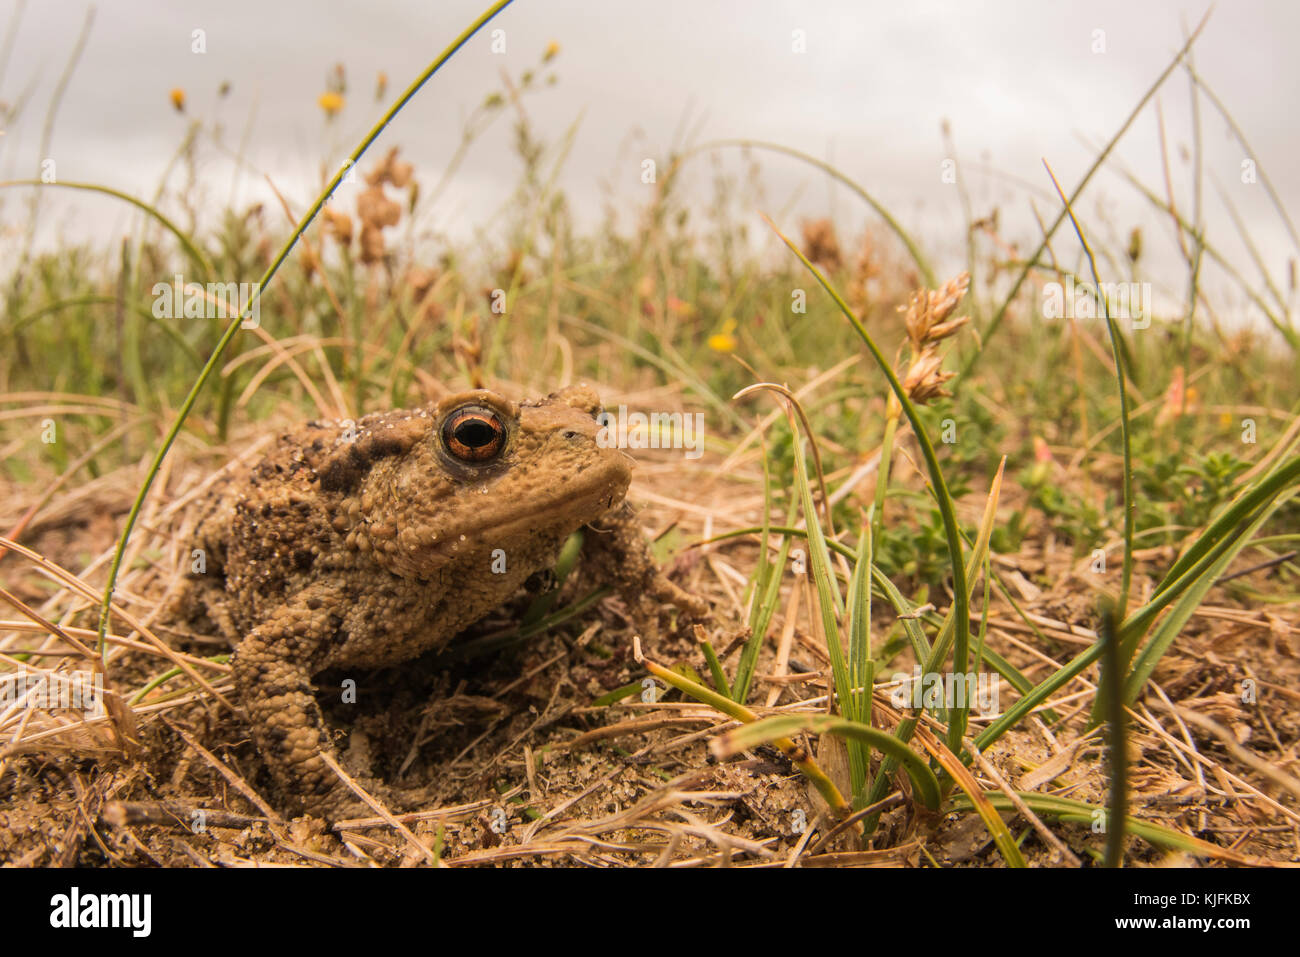 A common toad (Bufo bufo) from Norfolk, UK. Stock Photo